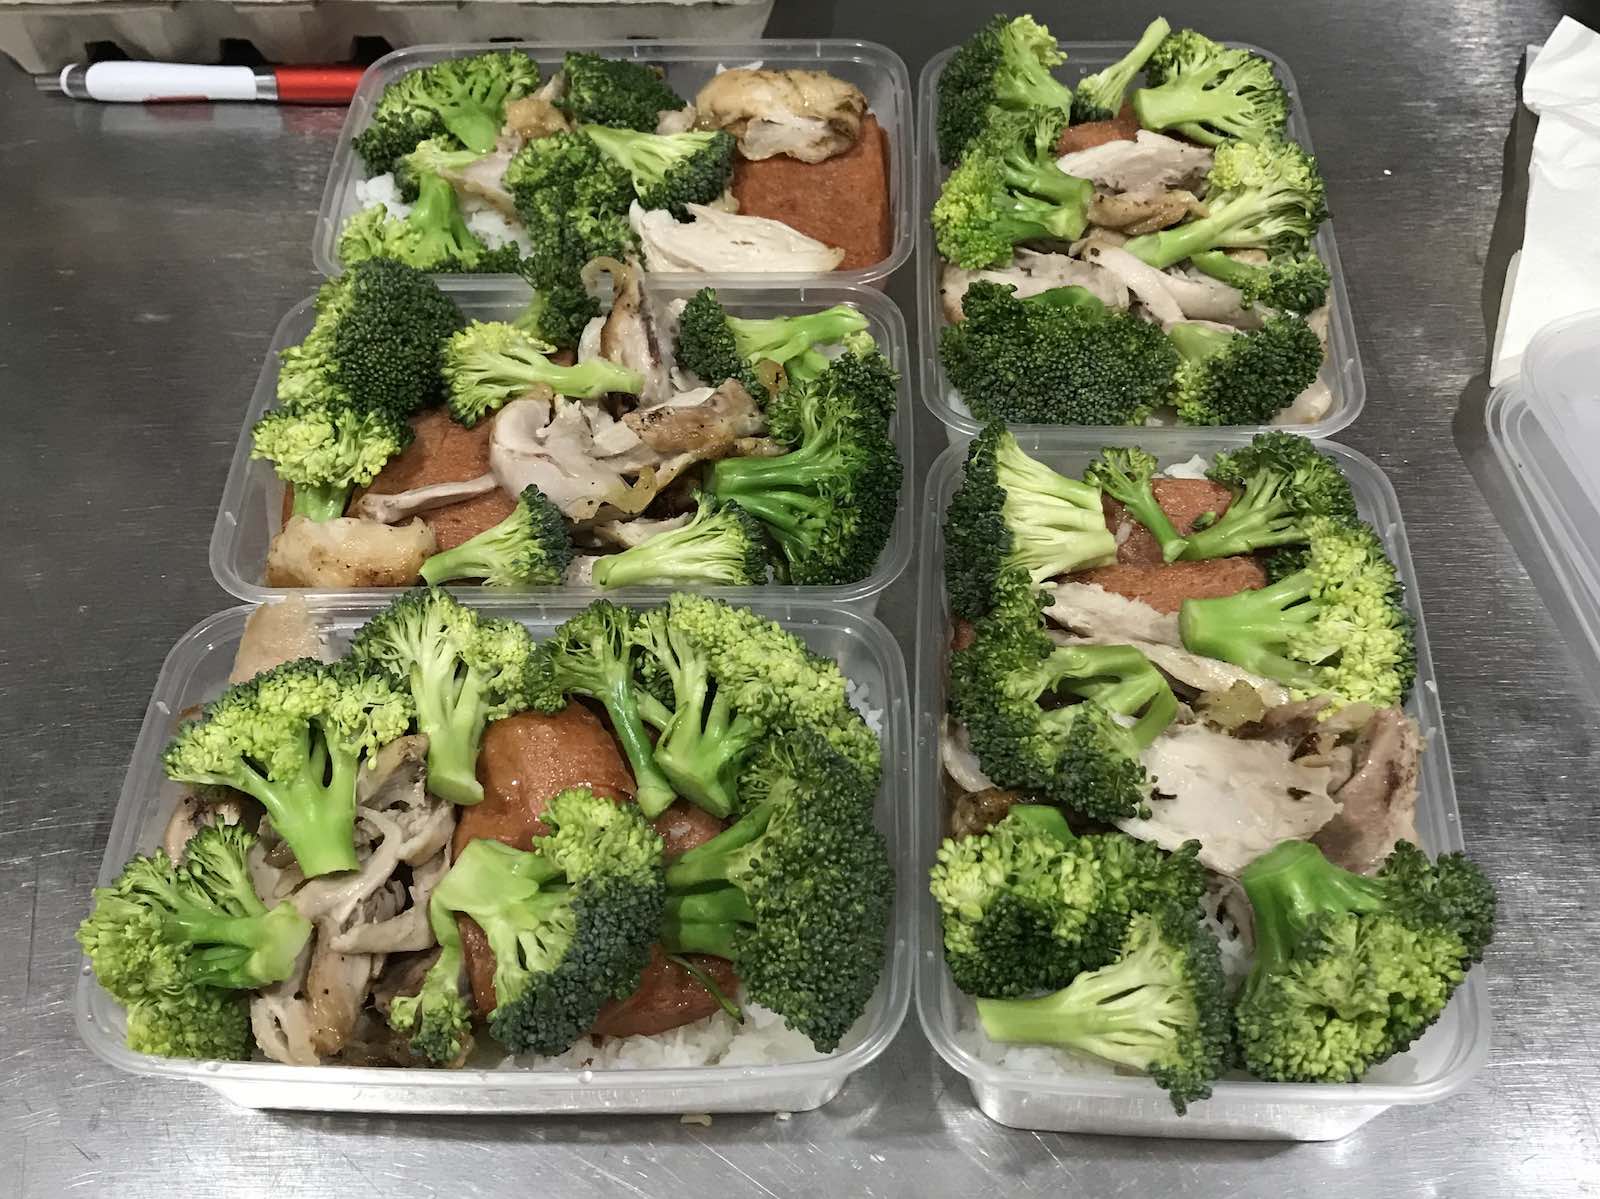 I used to meal prep a lot which saved me tons of money and it's about the same on the road. This works great when I'm staying in the same city for a couple days: rice chicken, spam and broccoli. I prepped this during my stay in Sydney, Australia.